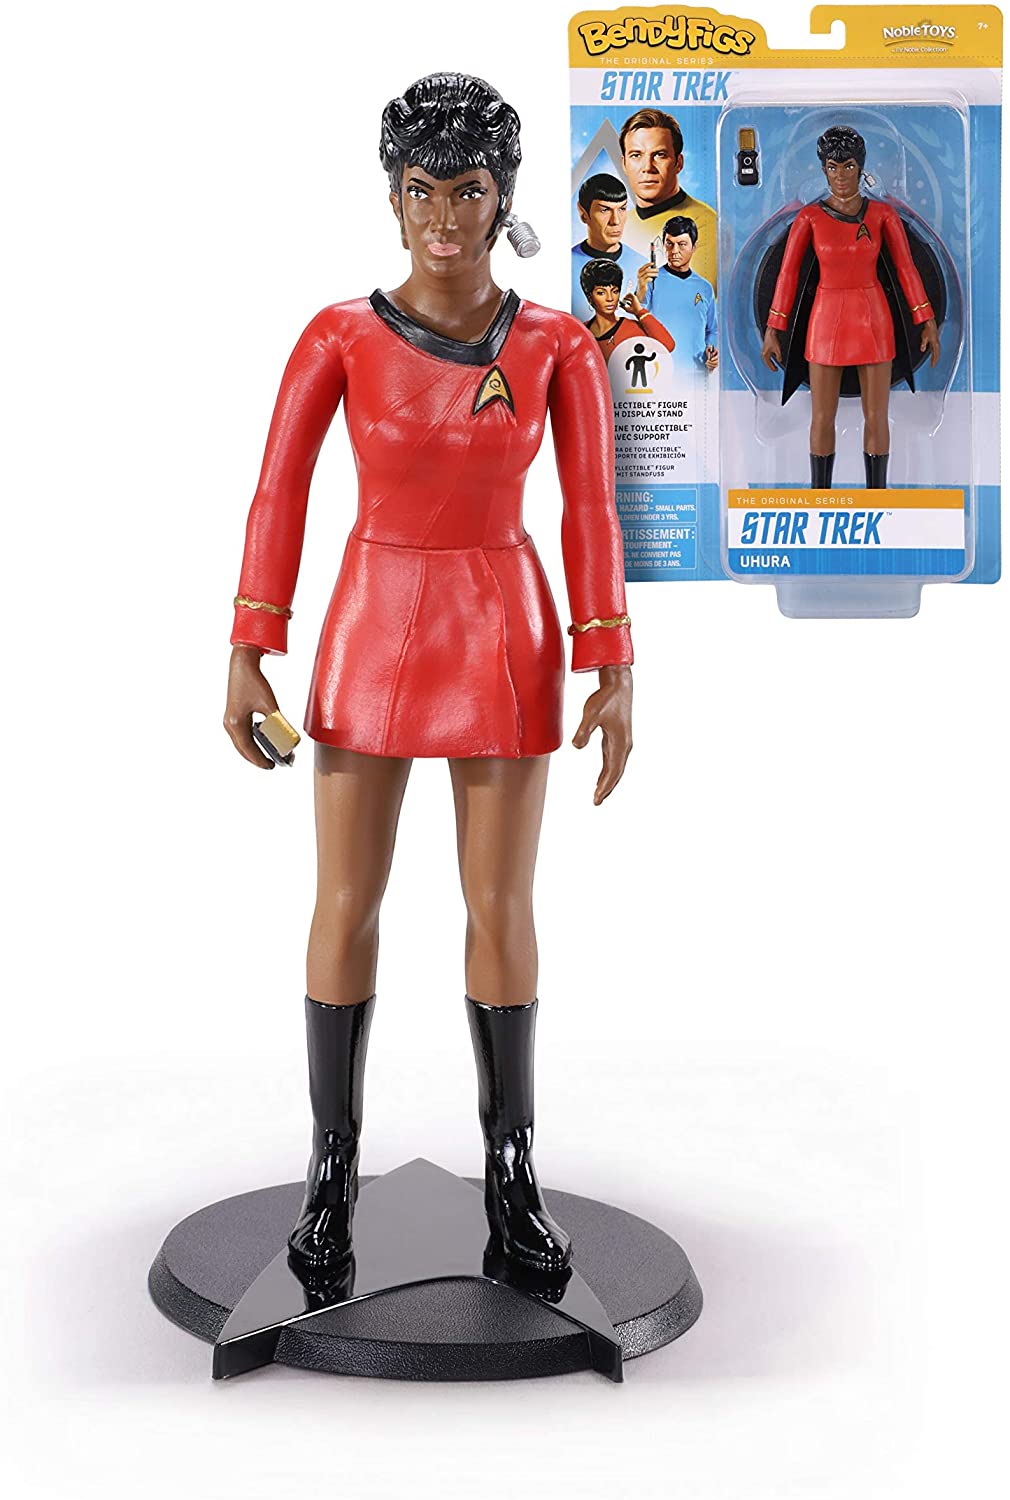 The Noble Collection Star Trek Bendyfigs Uhura - 7.5in (19cm) Noble Toys Bendable Figure Posable Collectible Doll Figures With Stand